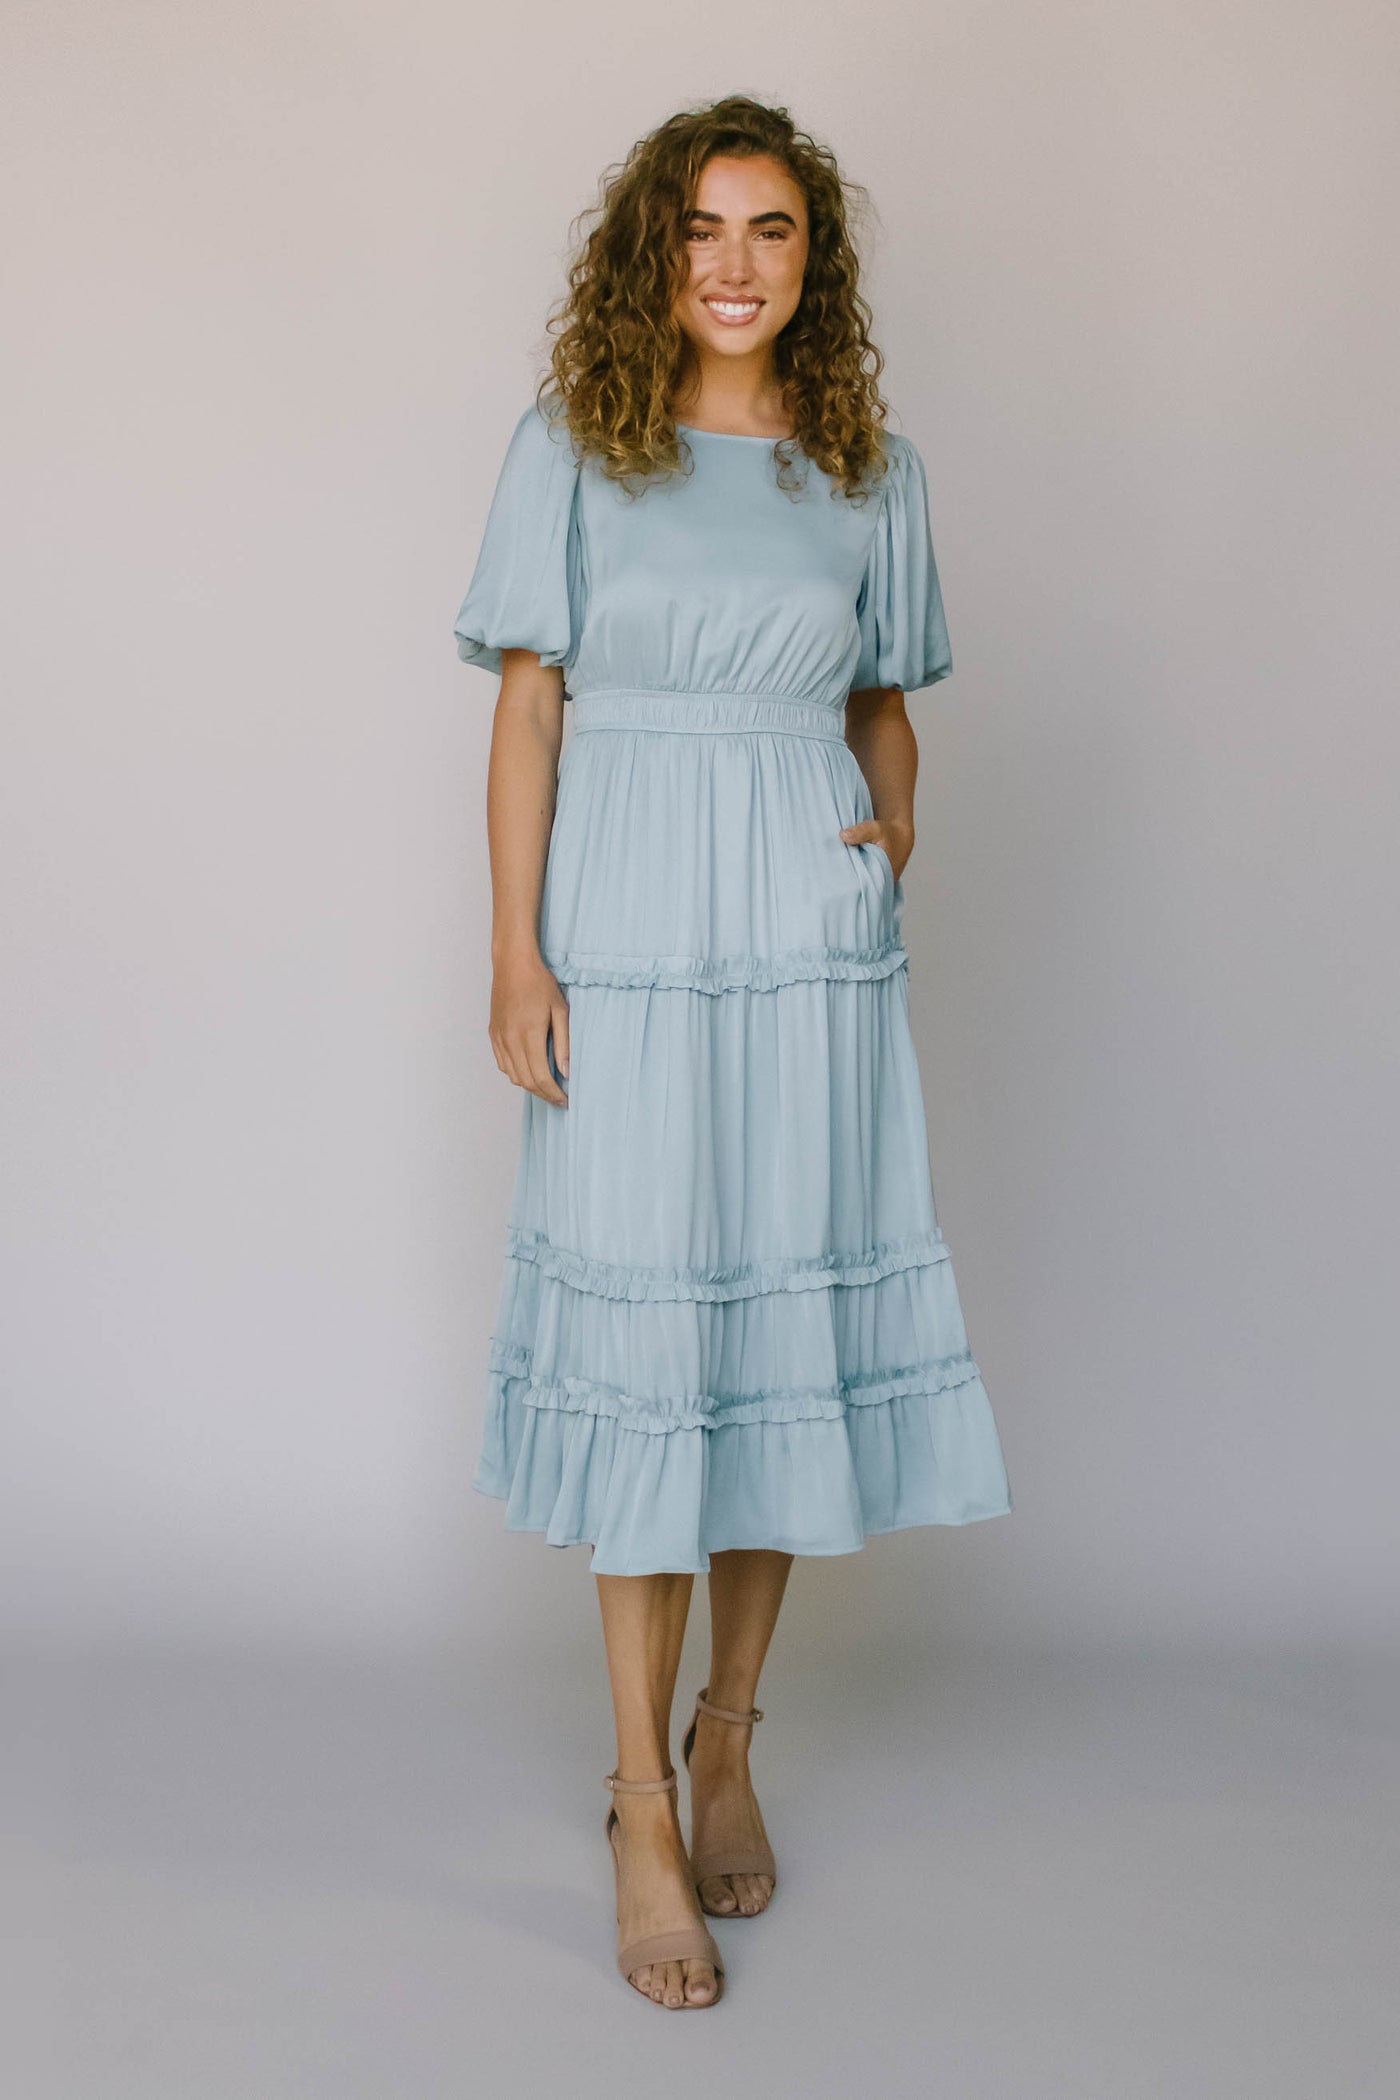 A modest bridesmaid dress in French blue with ruffled tiers, defined waist, puff sleeves, and a high neckline.